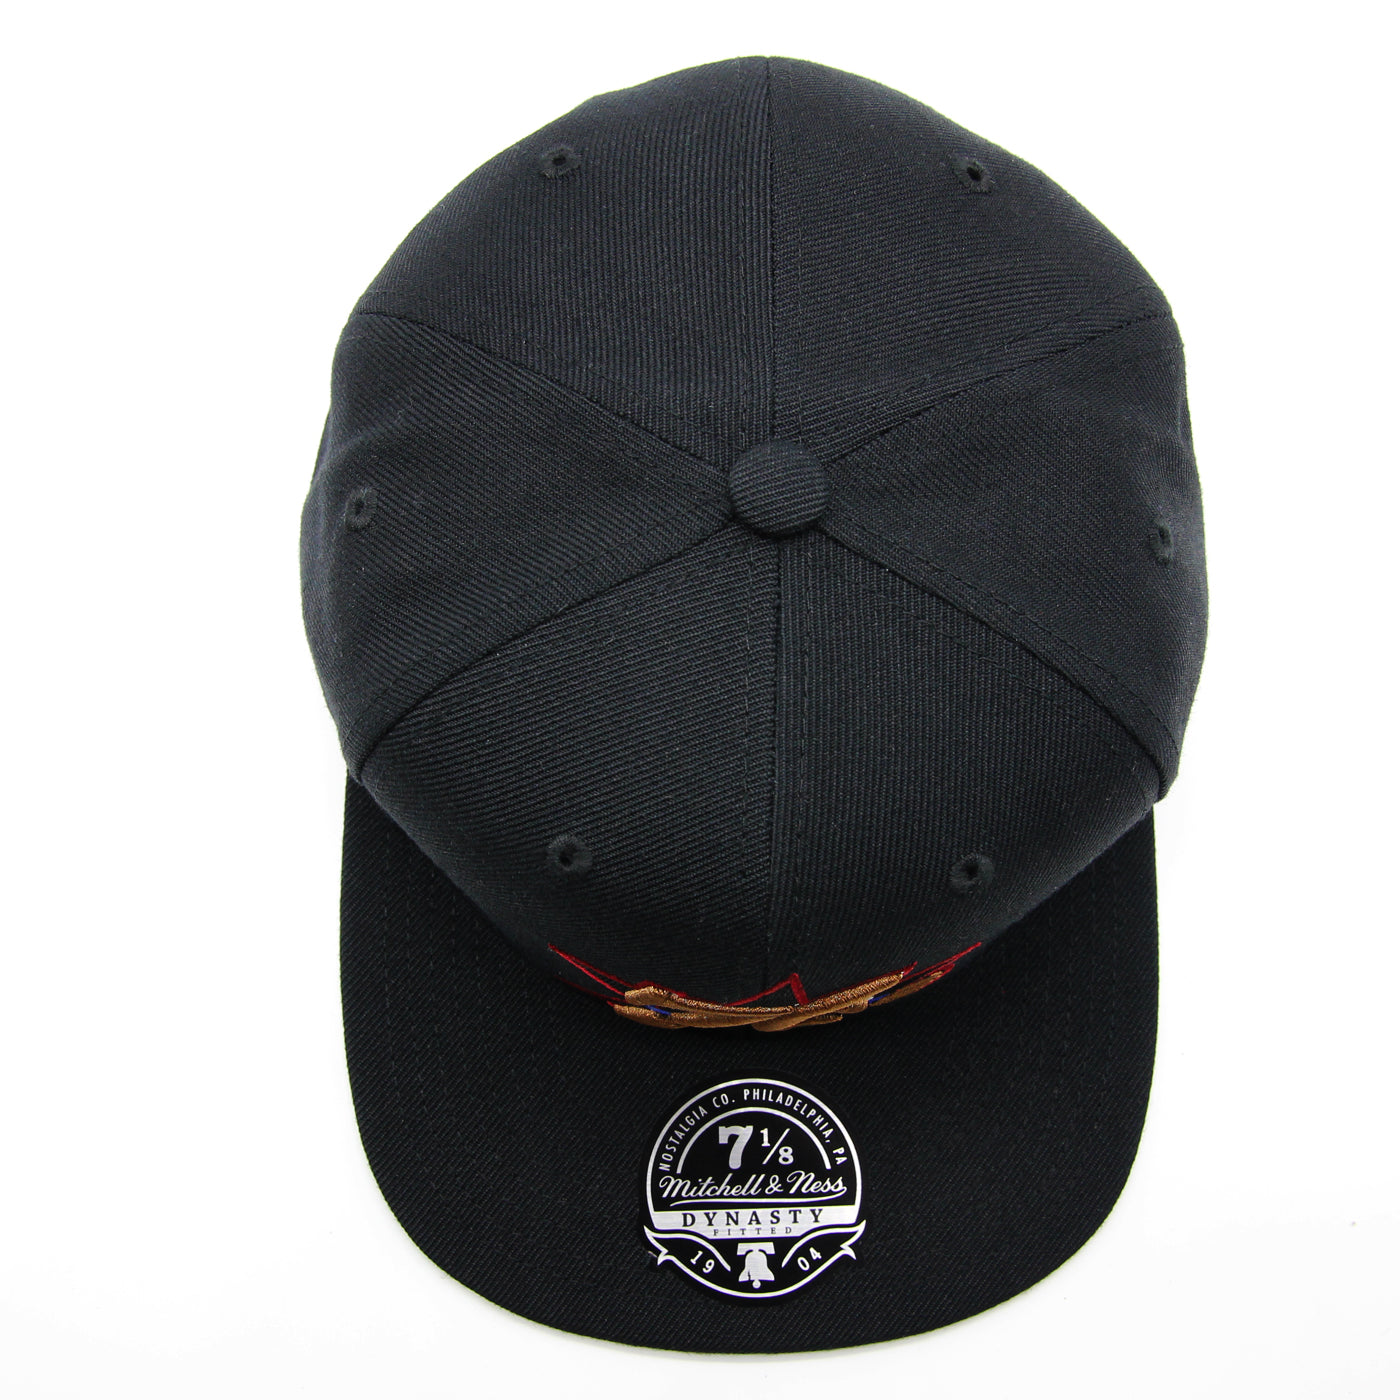 Mitchell & Ness Team Ground 2.0 fitted HWC P 76ers black